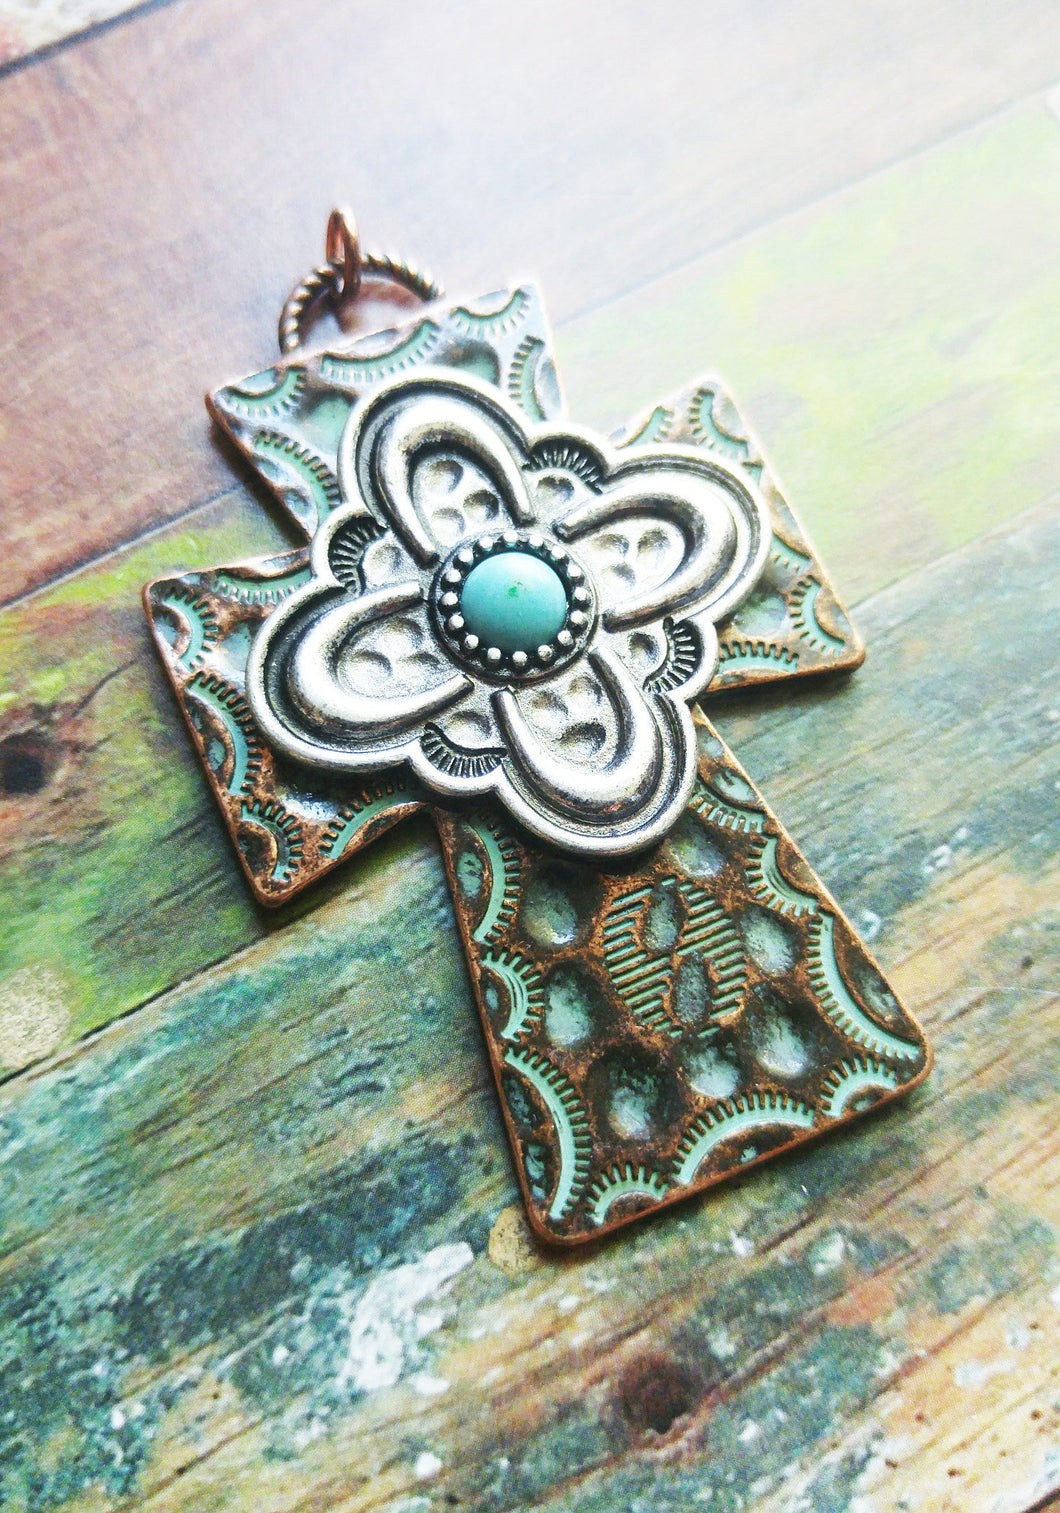 Large Cross Pendant Antiqued Copper Silver Cross Charm Turquoise Charm Vintage Style Focal Pendant Religious Charm Hammered Cross 2 7/16